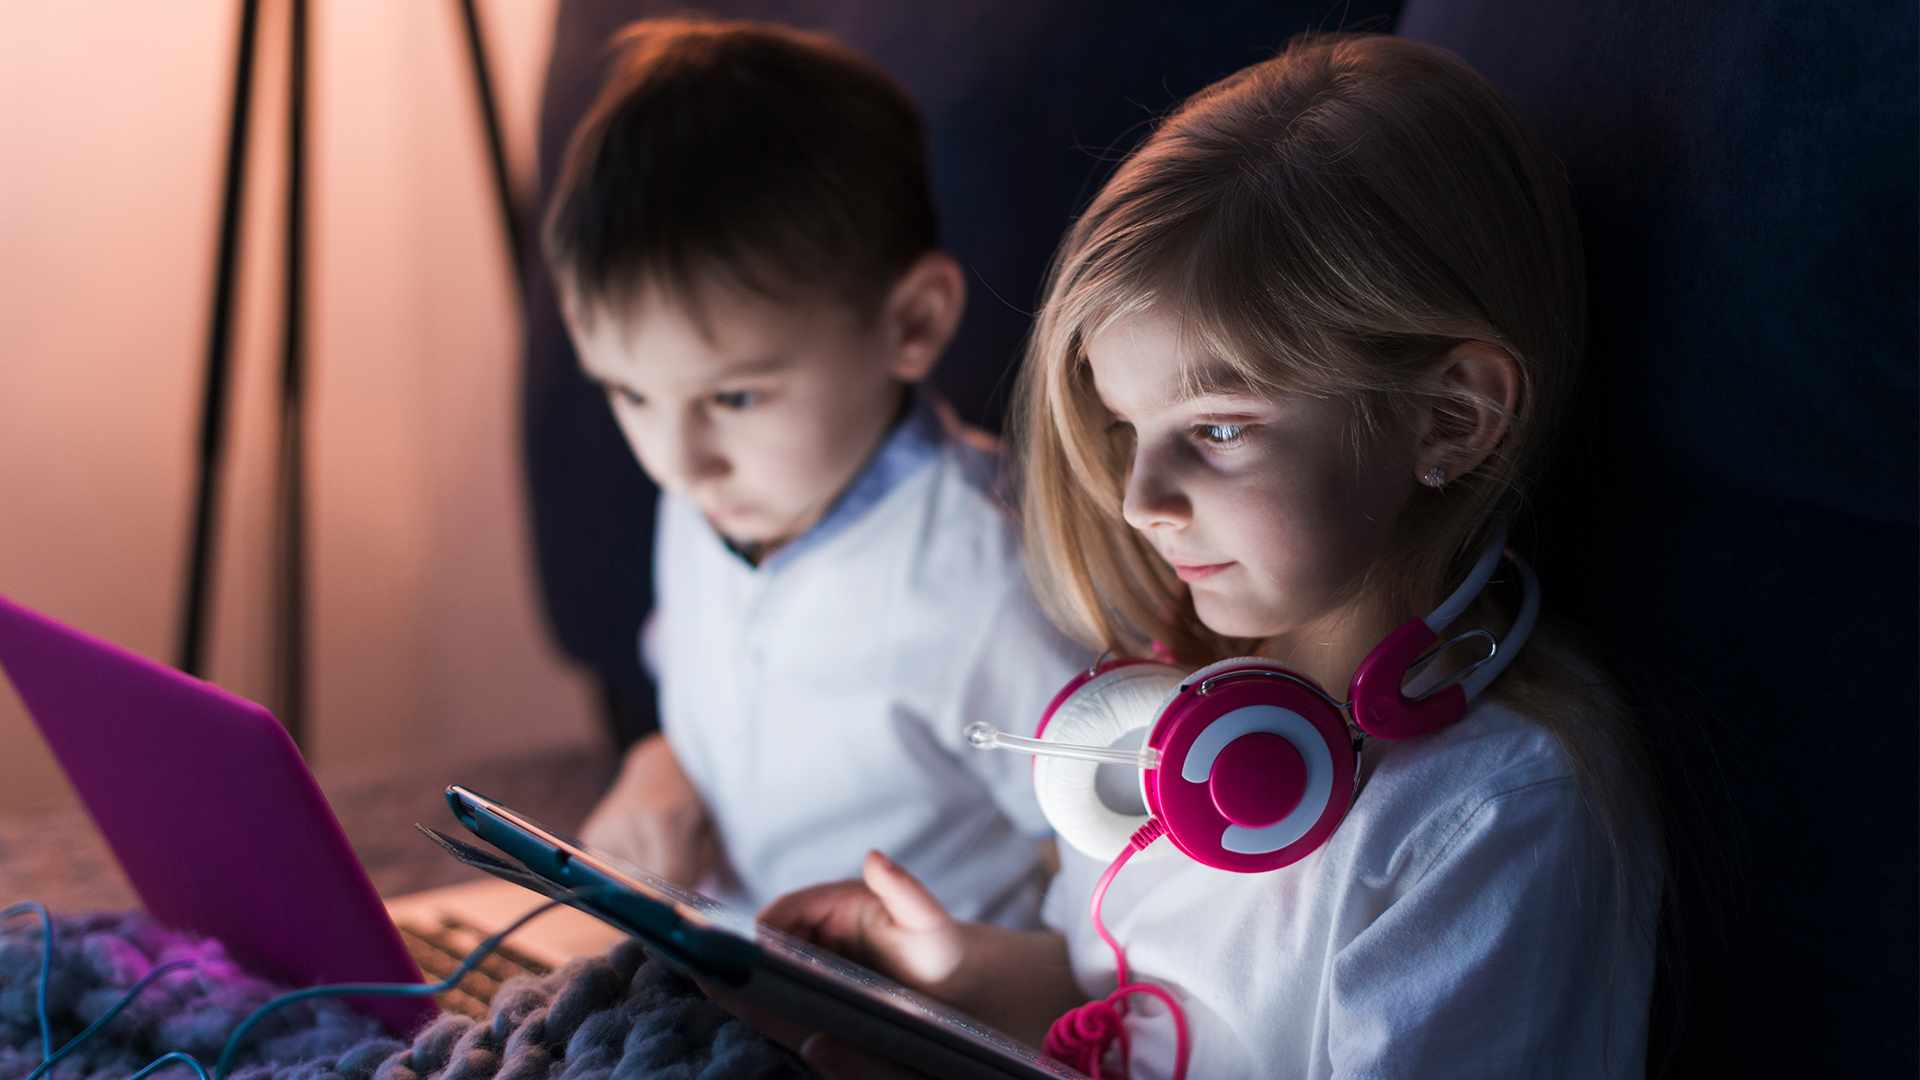 Children and Screen Time